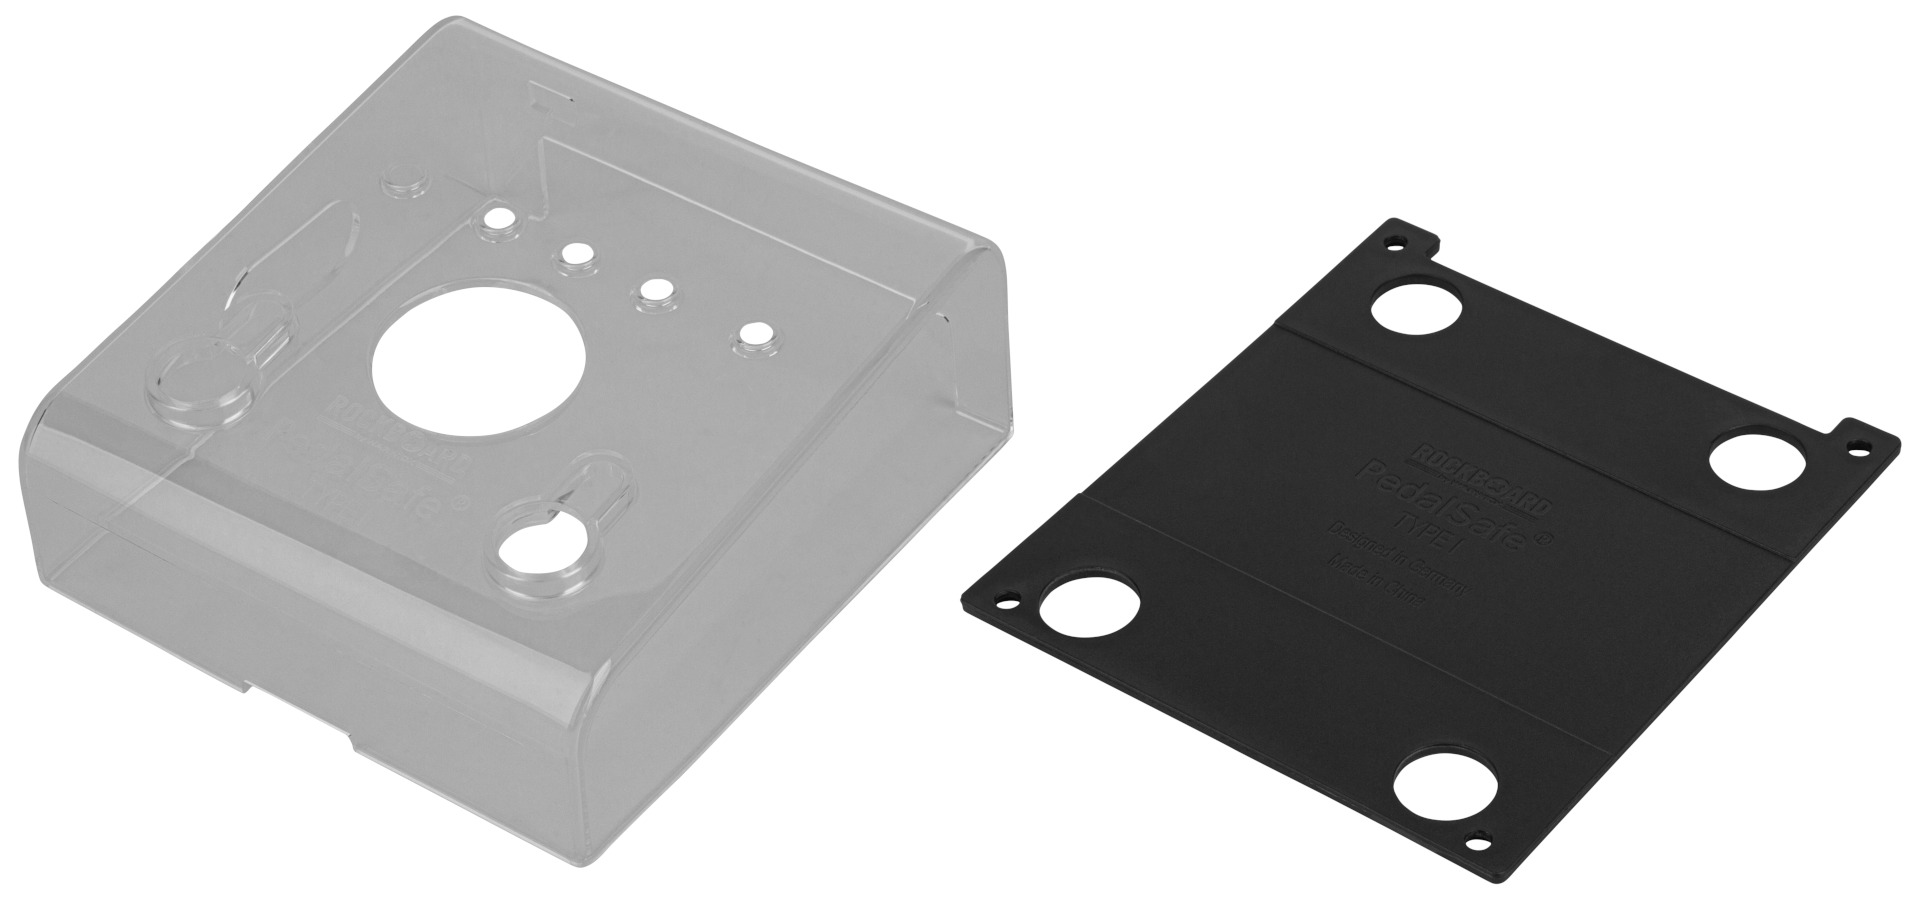 RockBoard PedalSafe Type I - Protective Cover And Universal Mounting Plate For Eventide H9